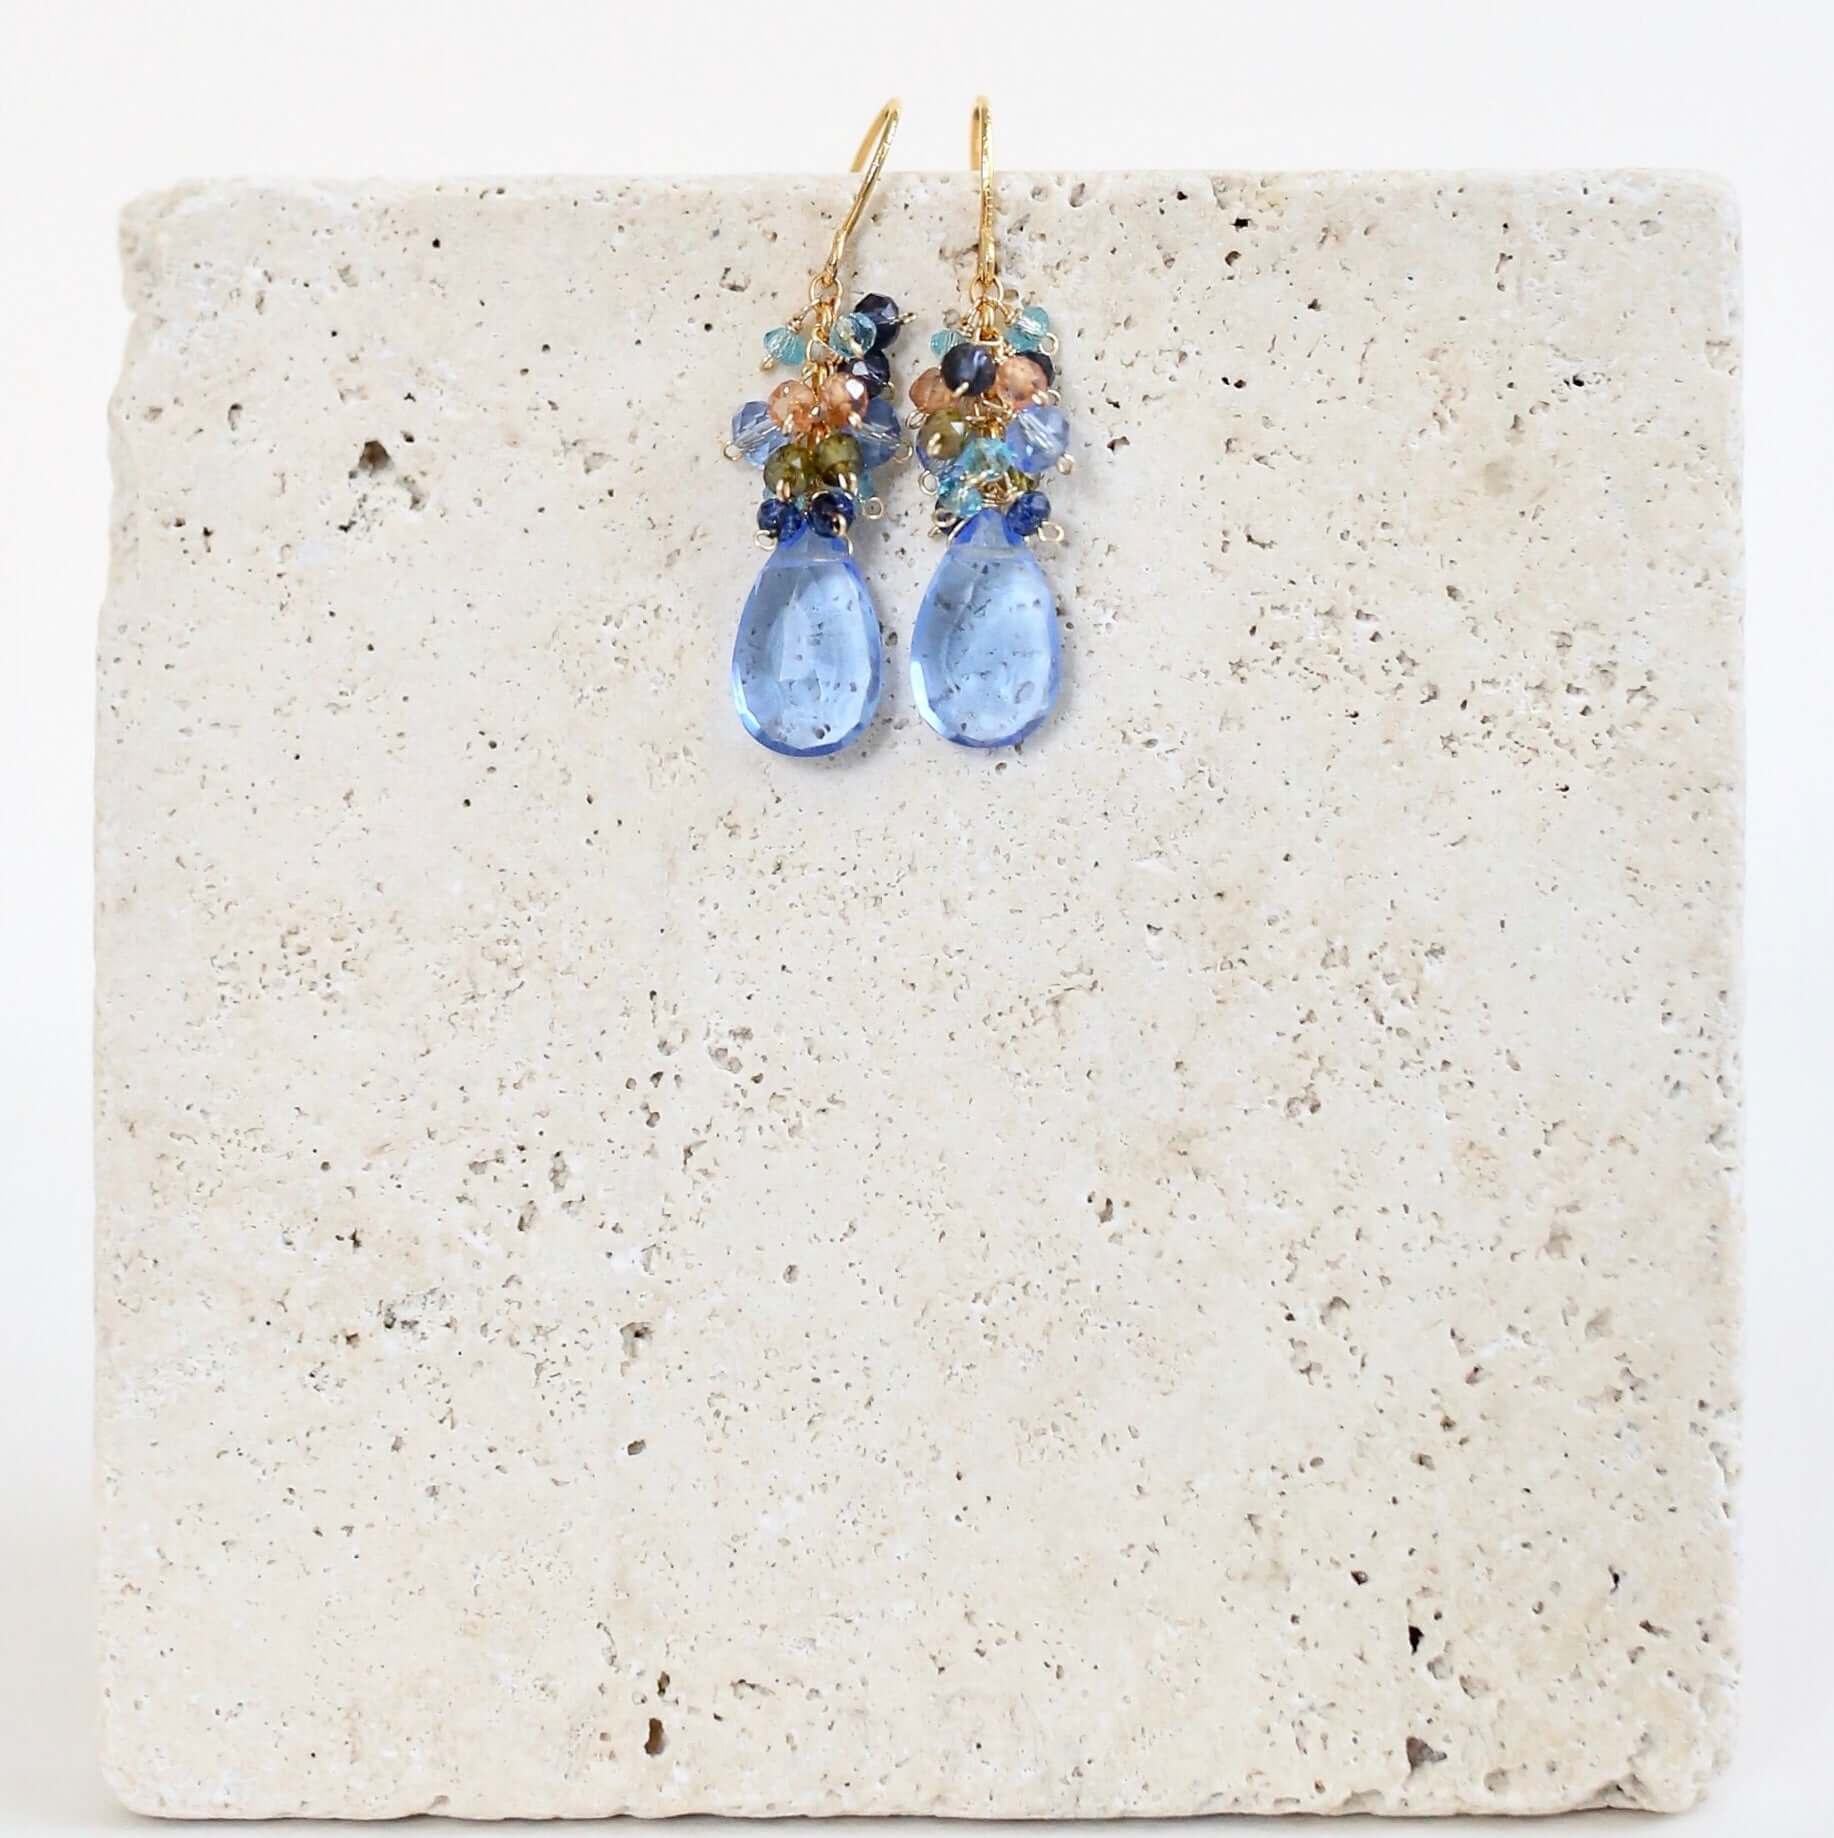 Gold drop earrings made with sky blue quartz topped with a blue cluster of gems